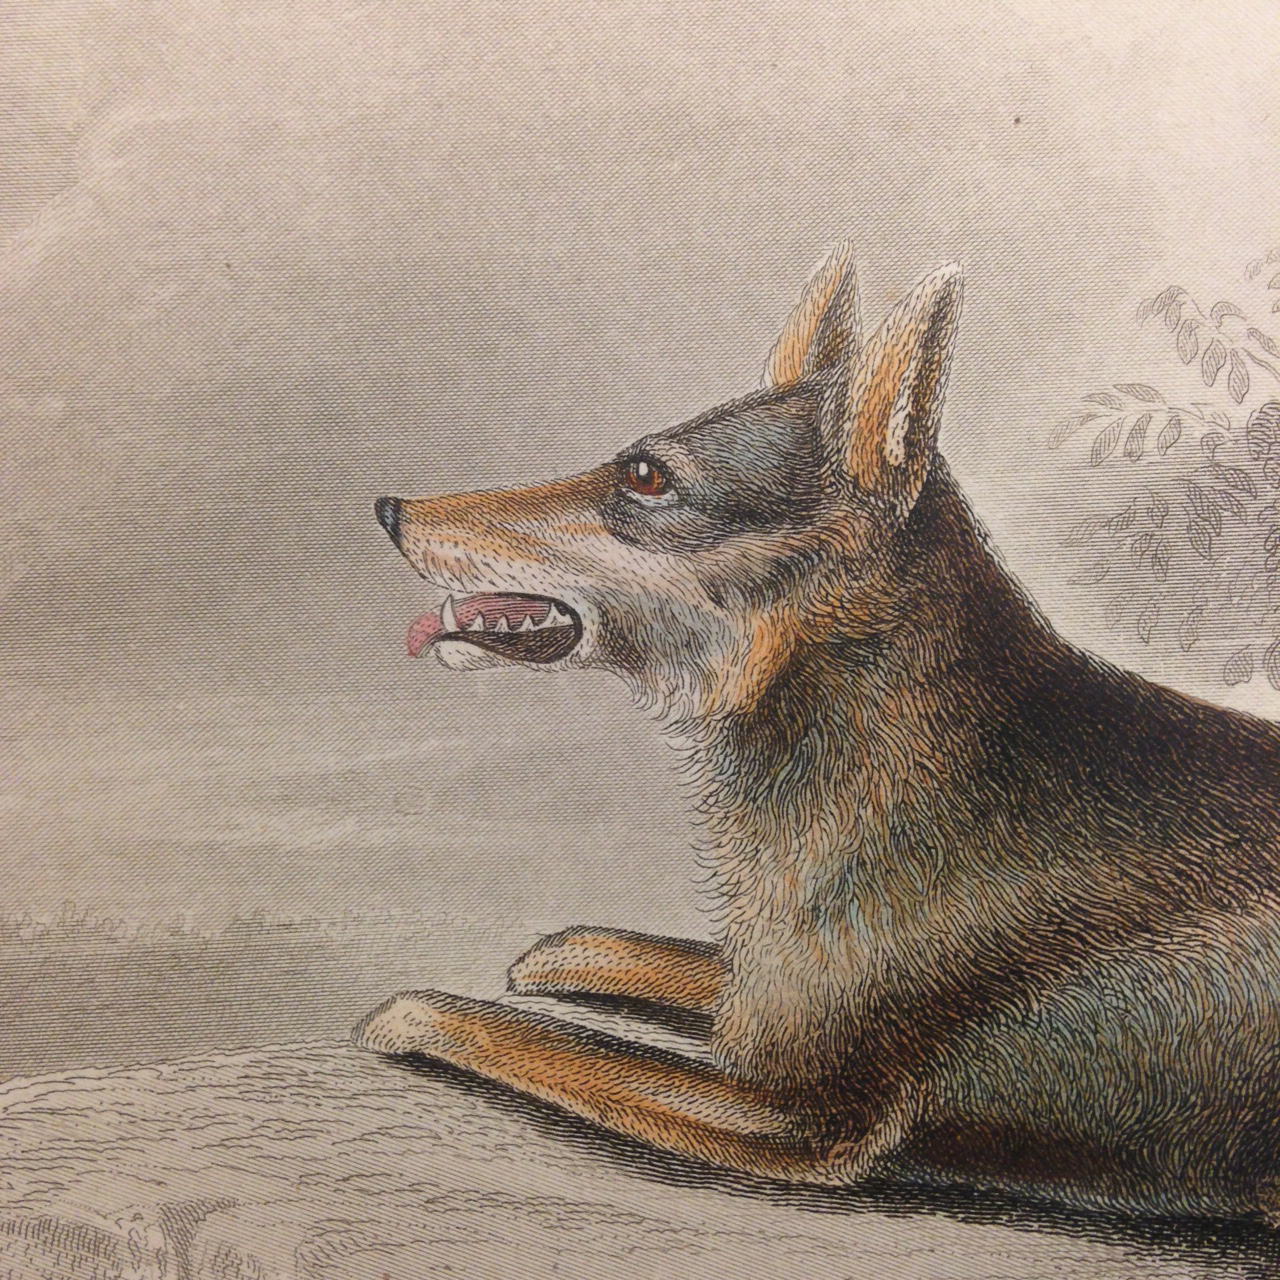 Mammalogy, Plate 3: 1. 2. Lupus occidentalis. (Northwestern wolf). – Sitting around the campfire with friends, you hear the howls and growls of wolves… Grrr….